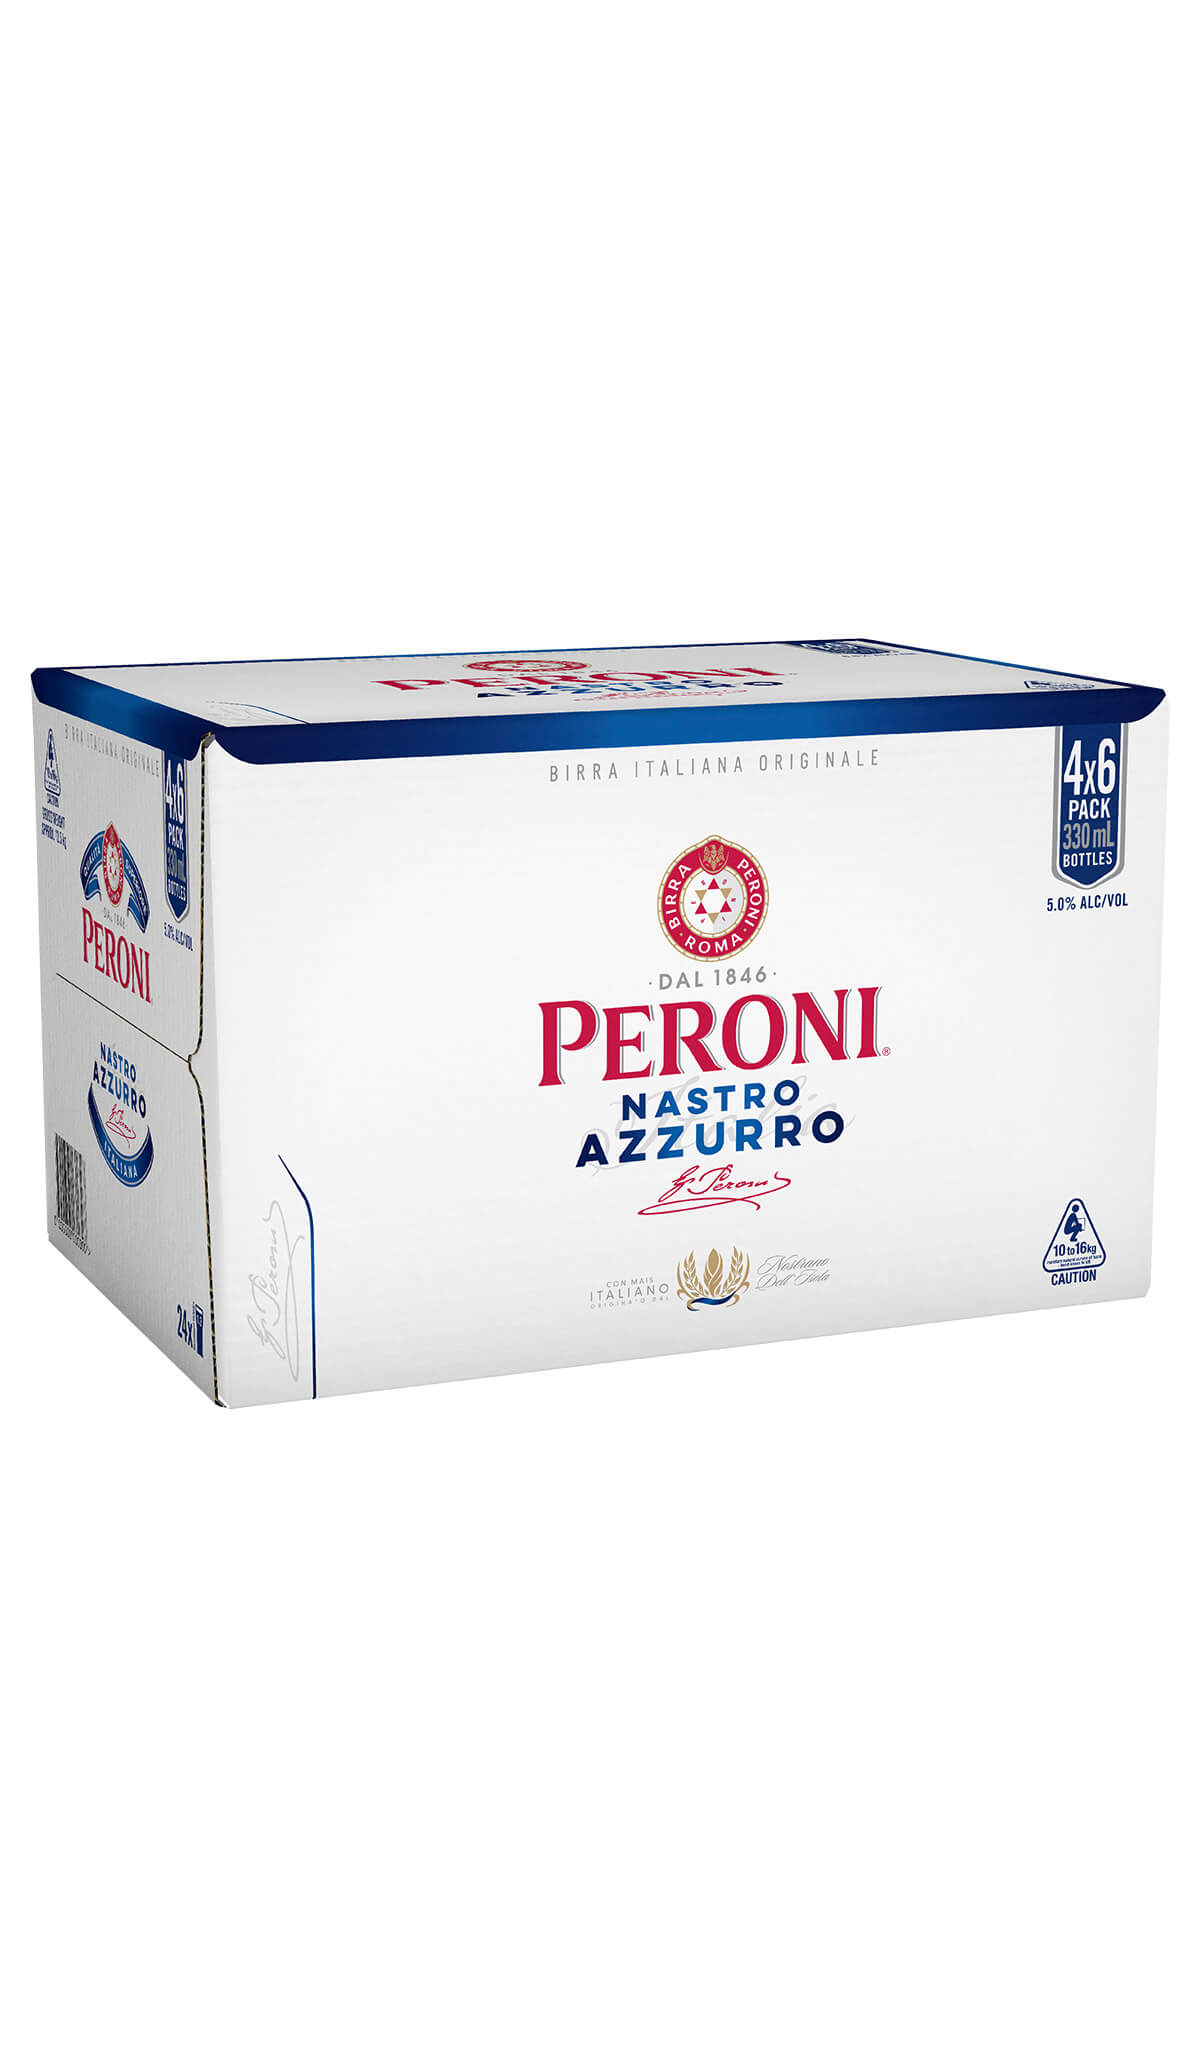 Find out more, explore the range and purchase Peroni Nastro Azzurro 24x330ml Stubbies Slab online at Wine Sellers Direct - Australia's independent liquor specialists.